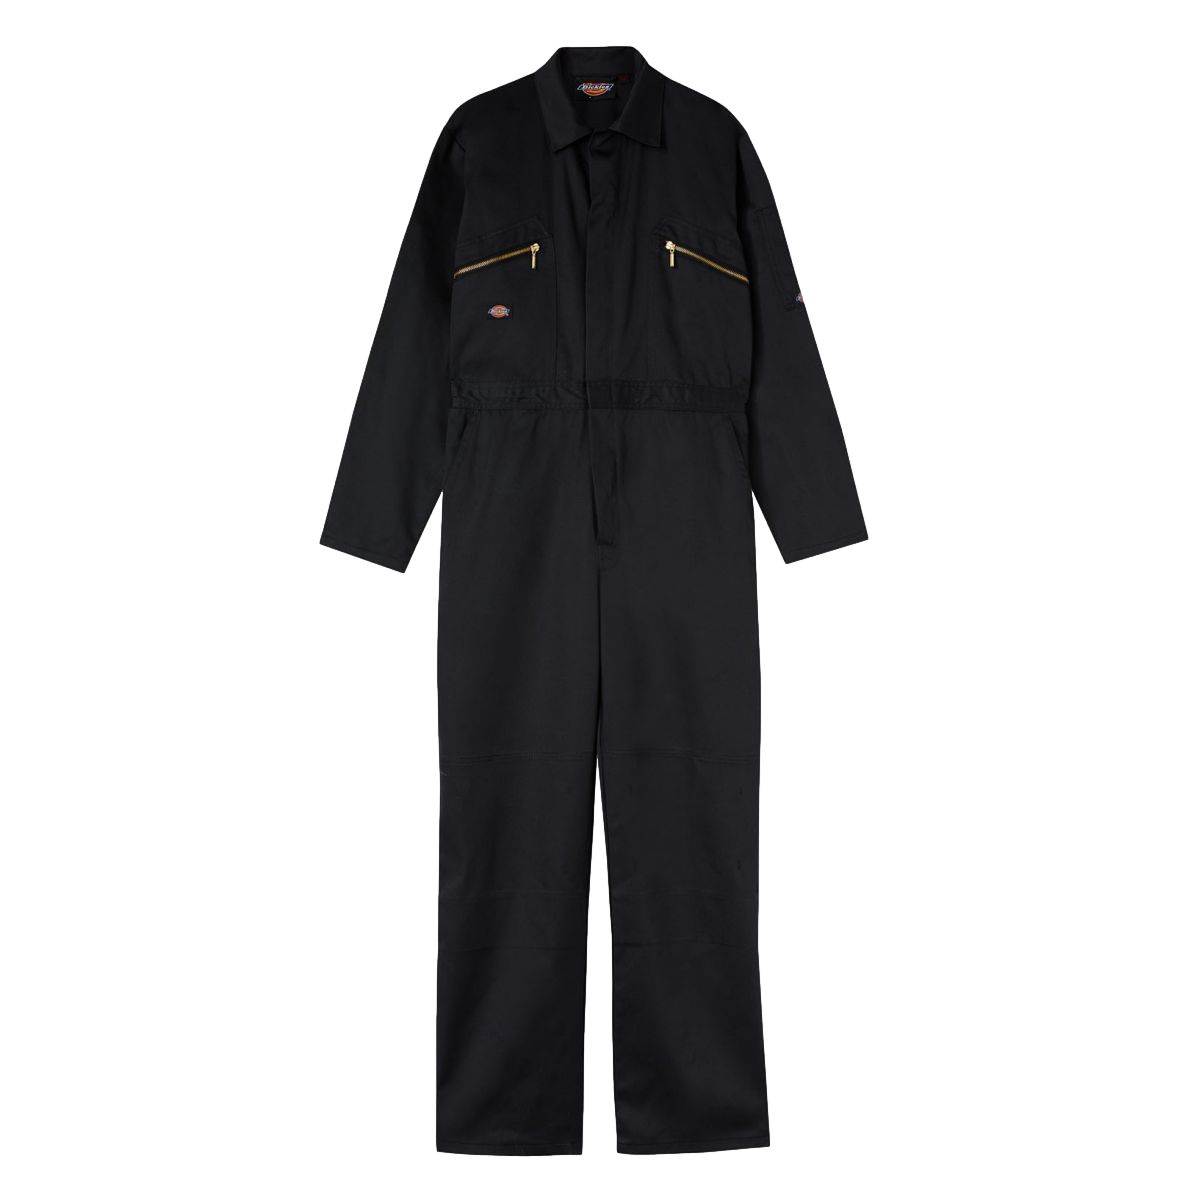 Combinaison Redhawk Coverhall Noir - Dickies - Taille M 0